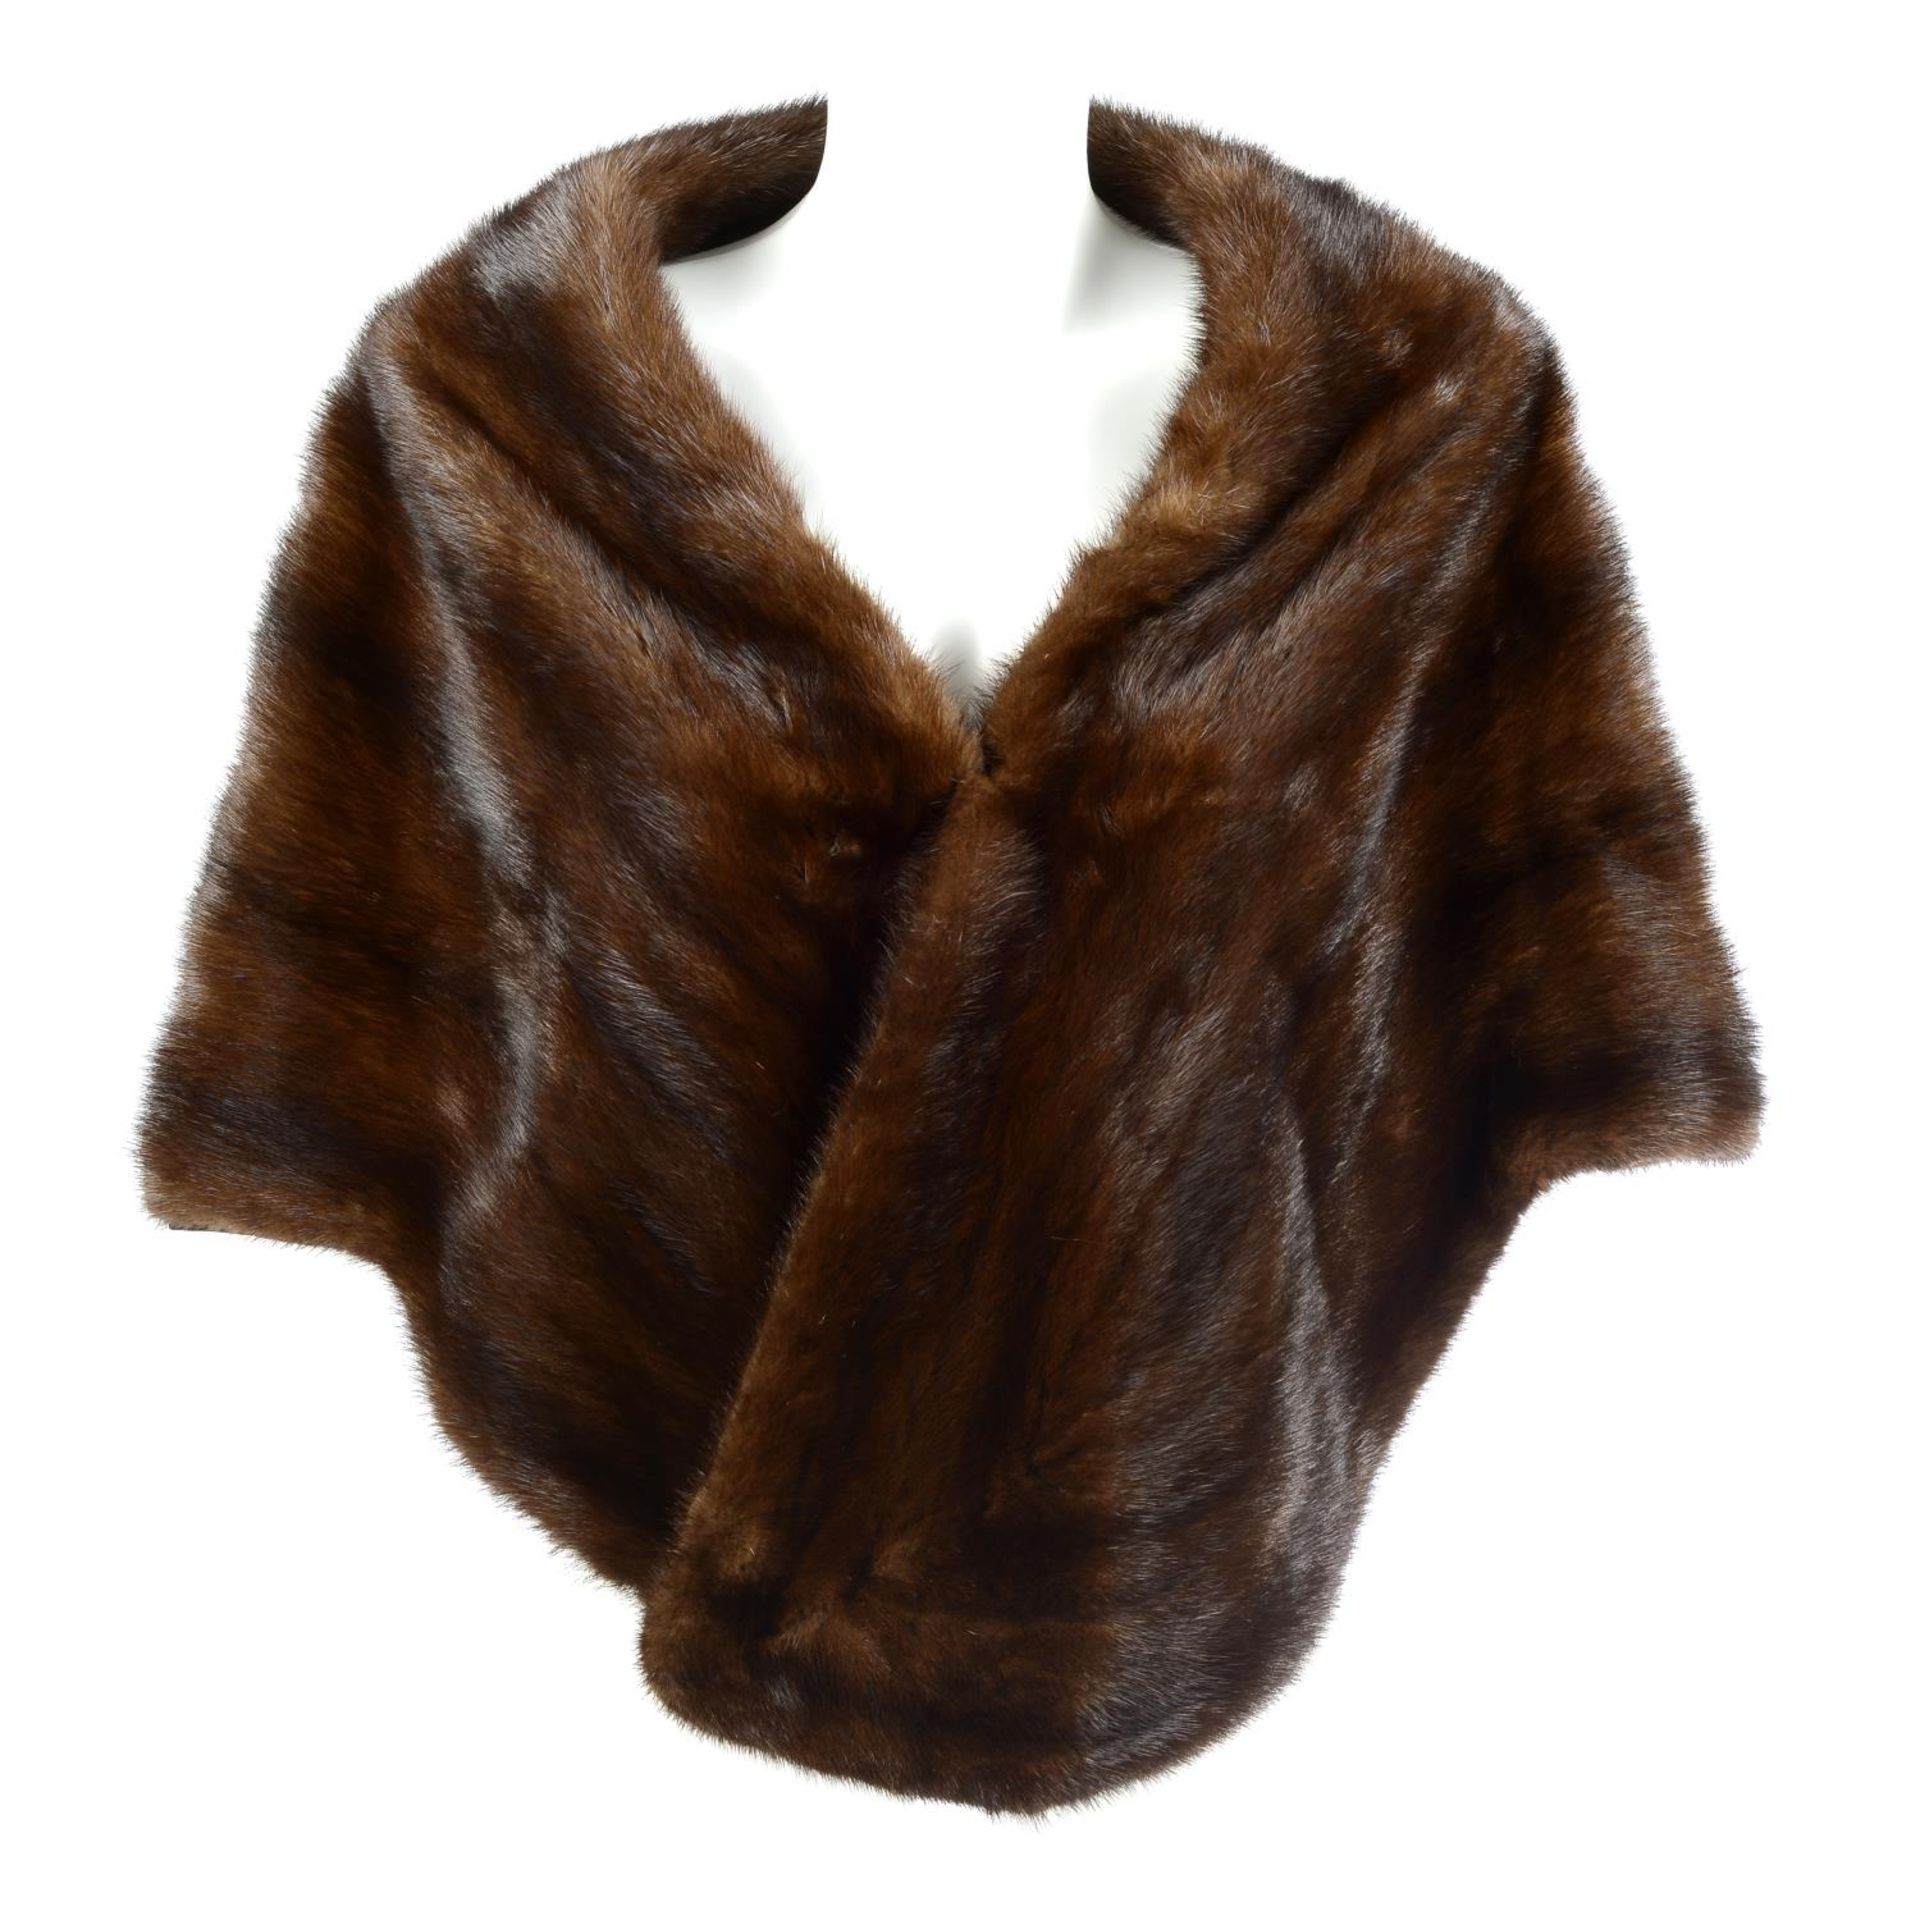 A selection of fur items.